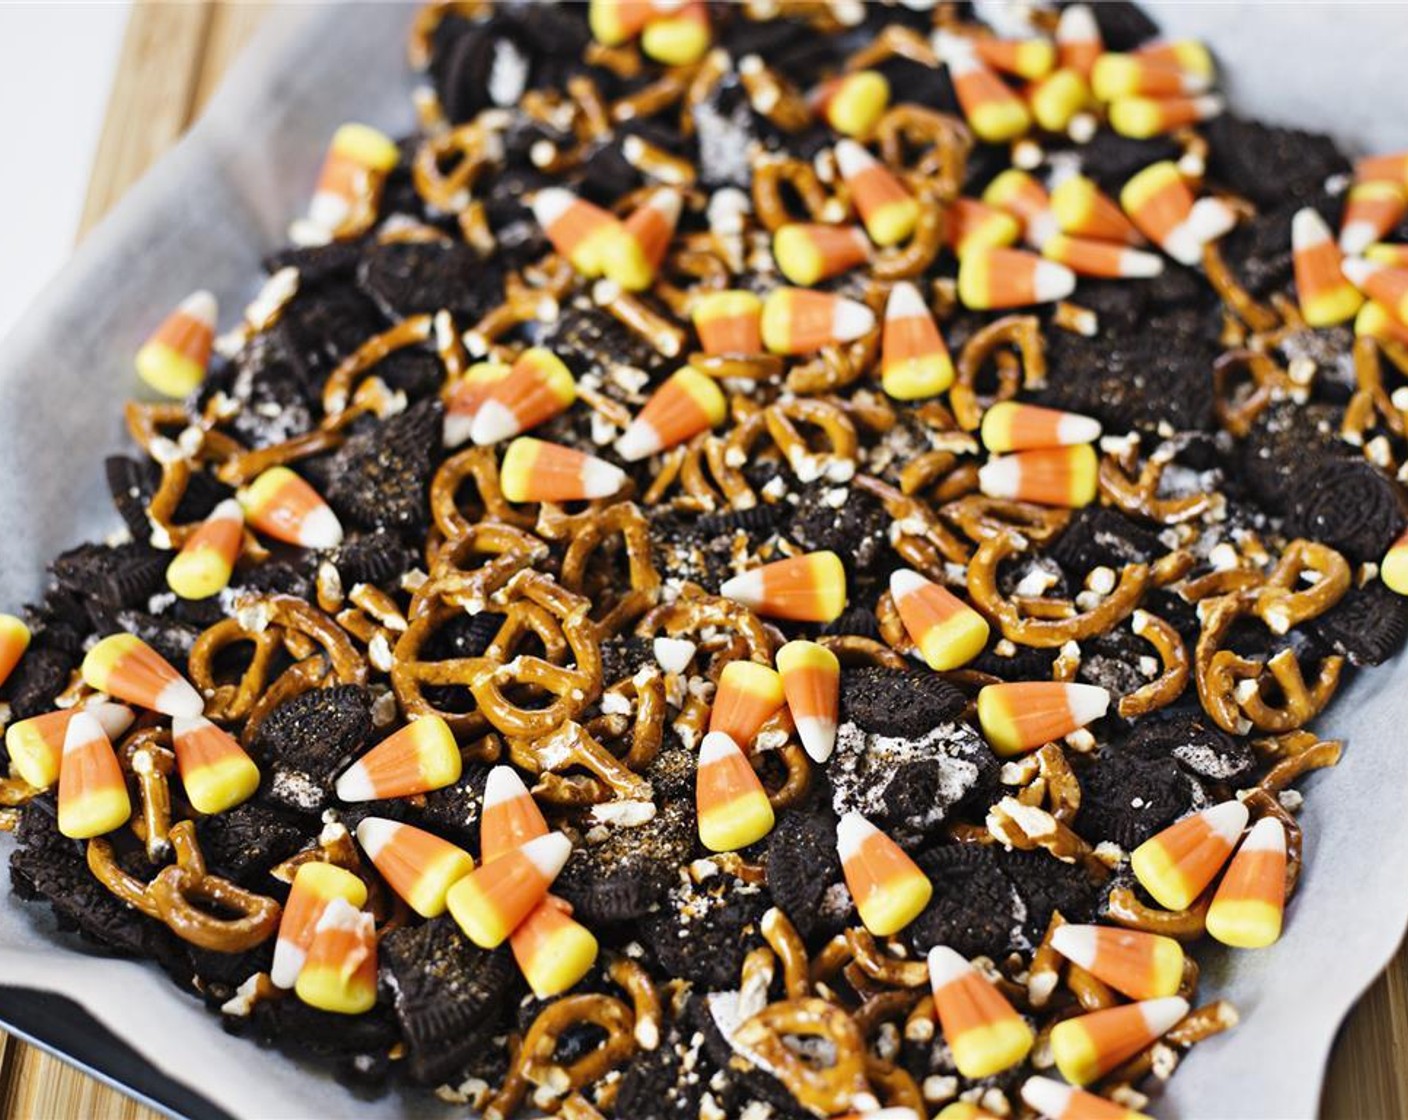 step 5 Evenly spread the Candy Corn (1 cup) on top of the Oreos and pretzels.